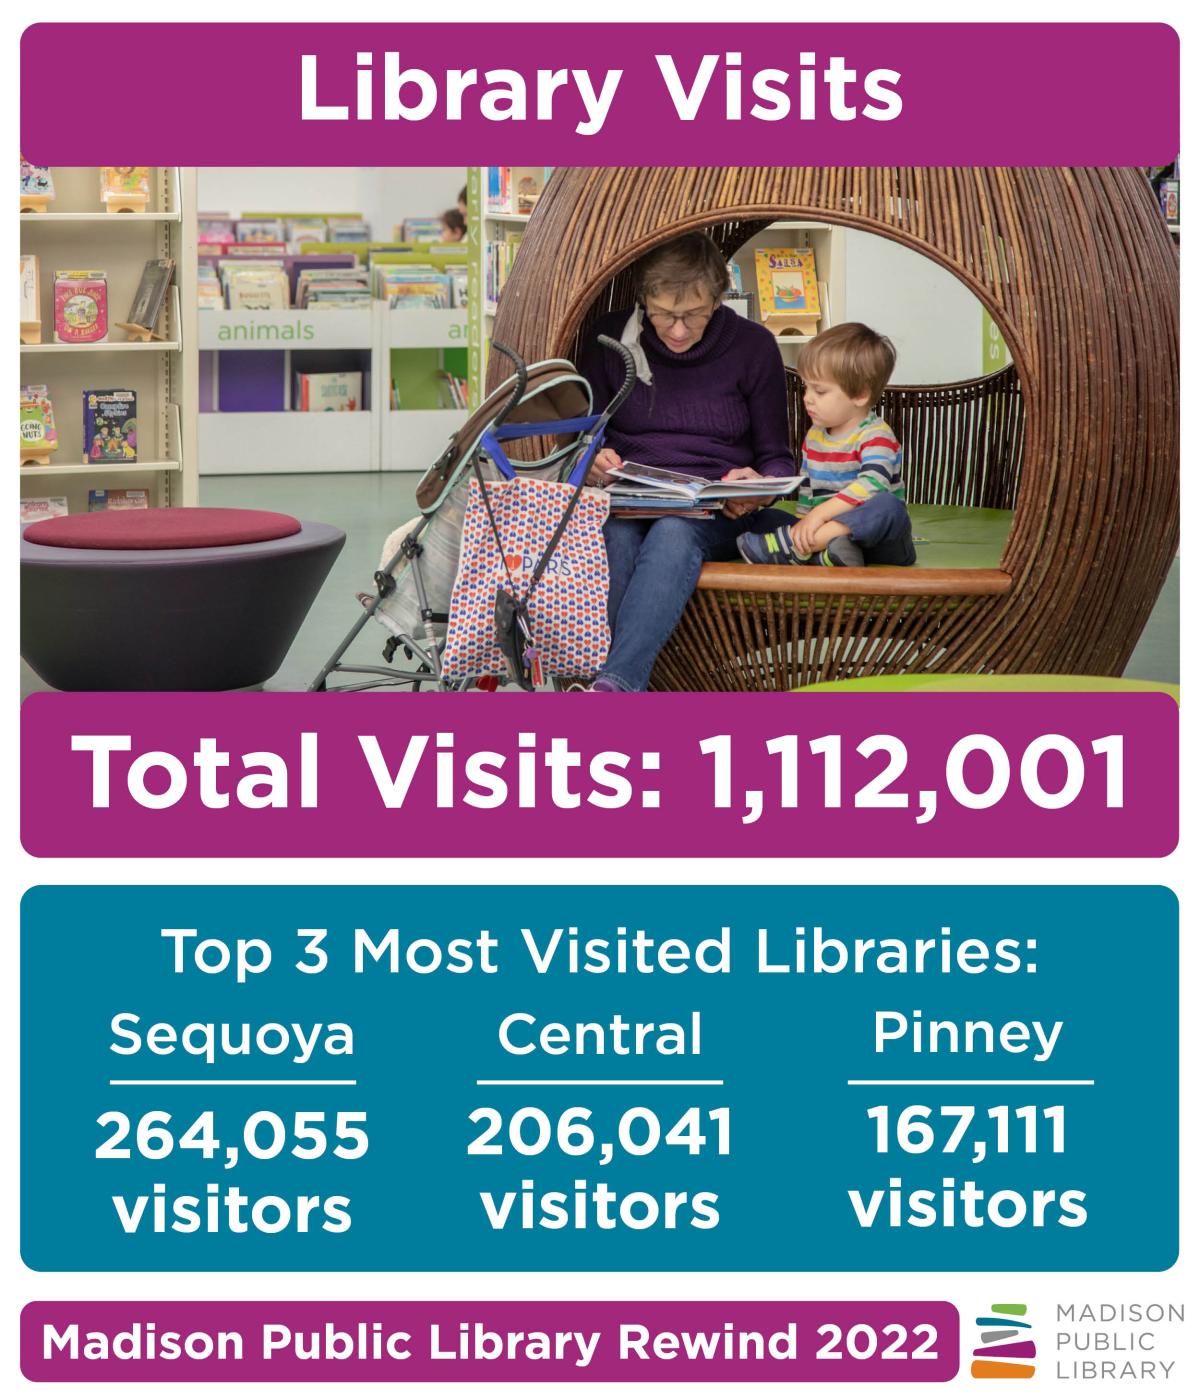 Total library visits to Madison Public Libraries in 2022